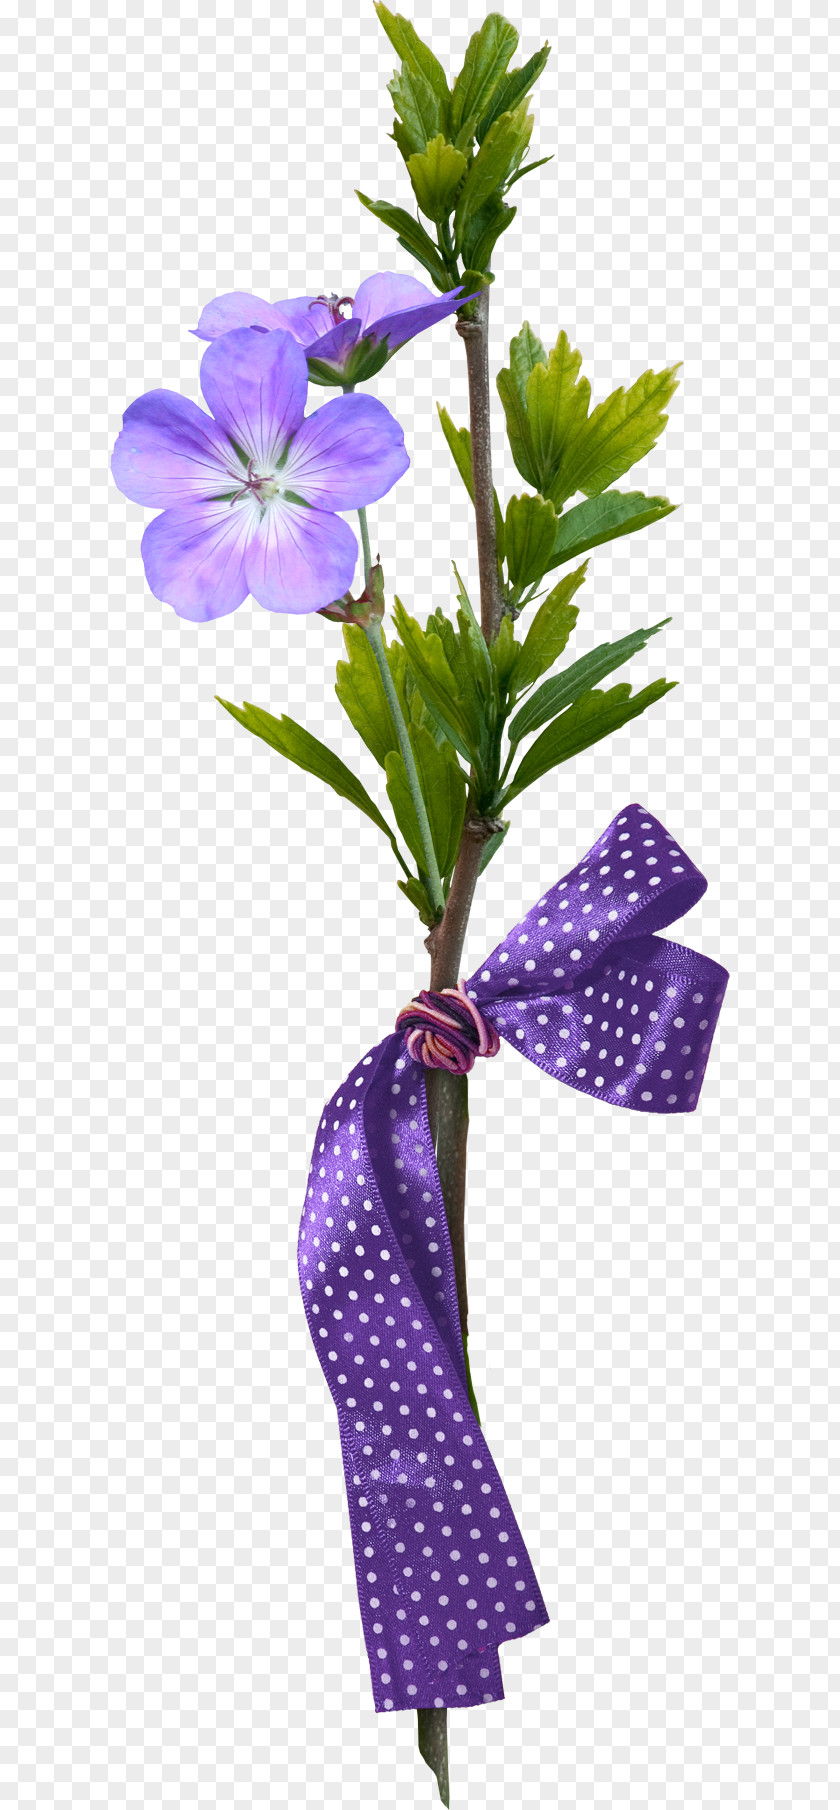 Flowers And Plants Flower Clip Art PNG